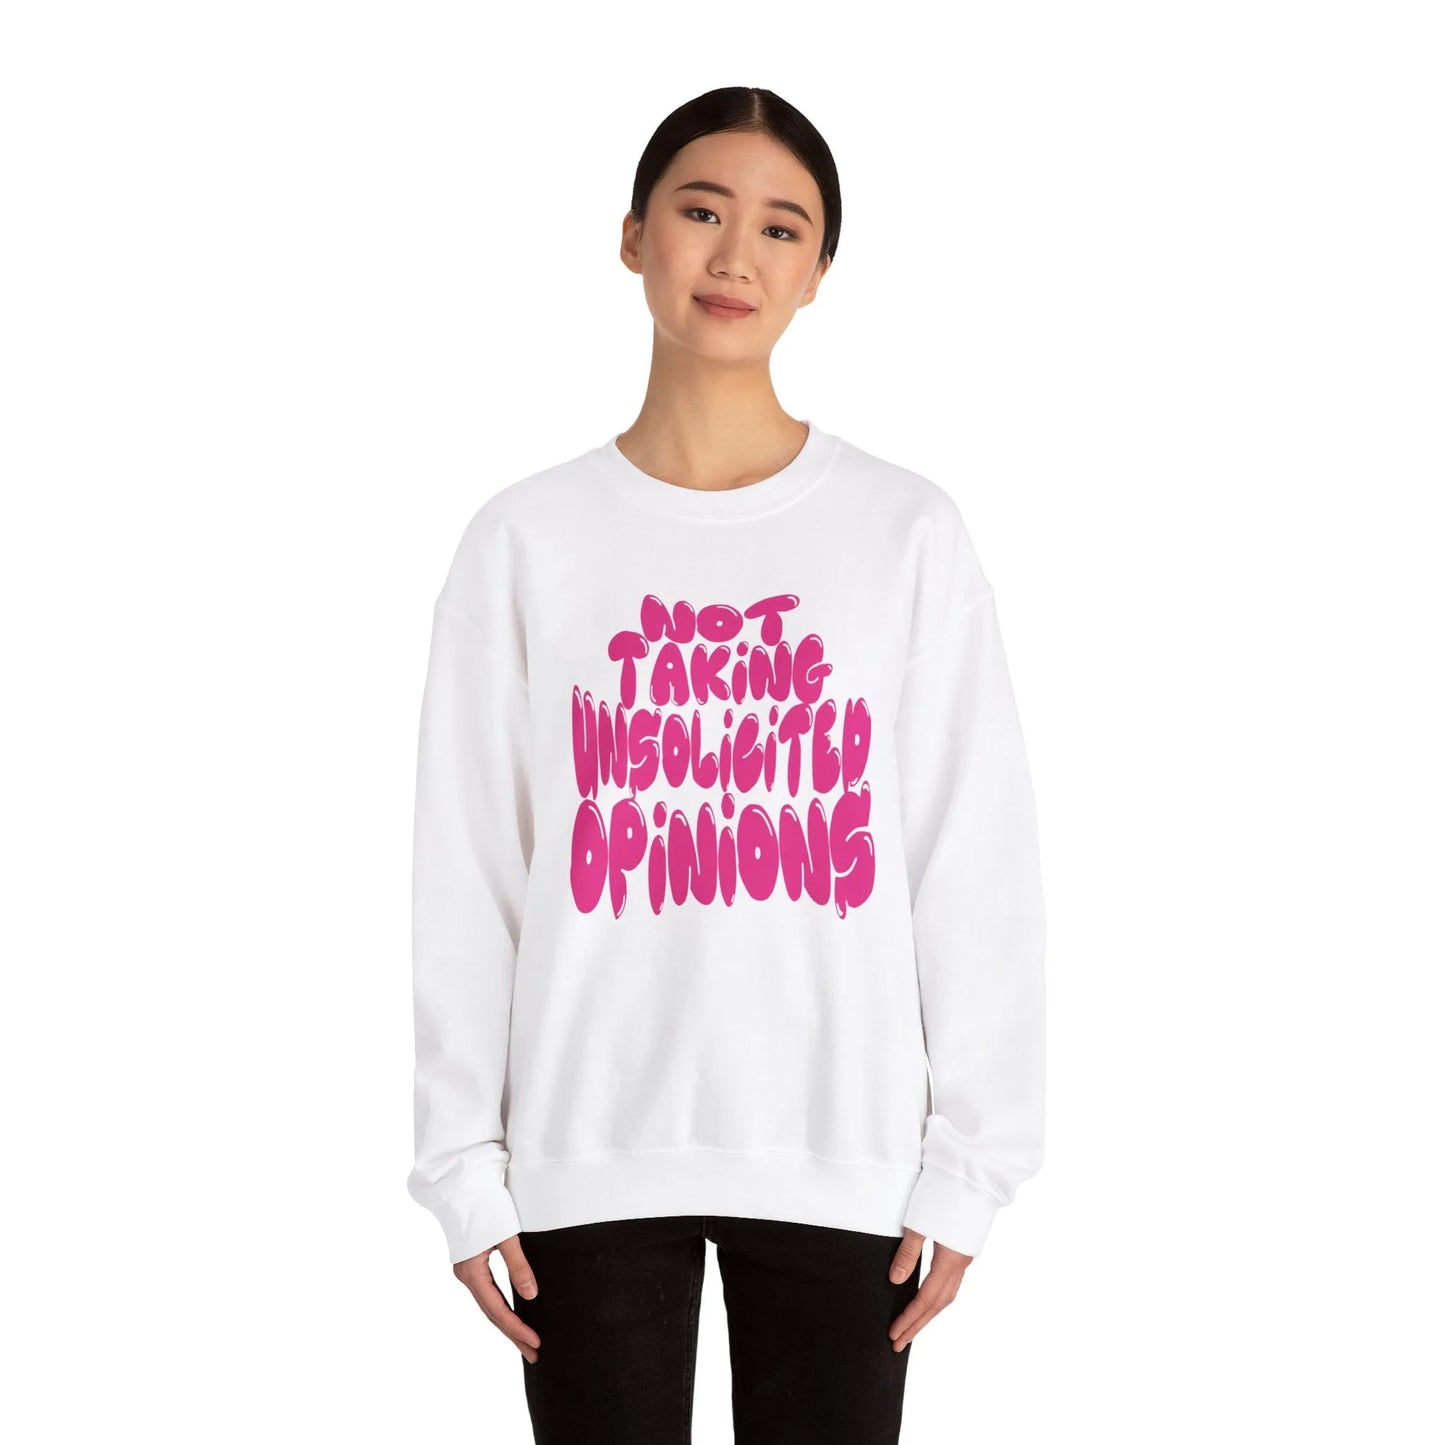 Not Taking Unsolicited Opinions Crewneck Sweatshirt White Model